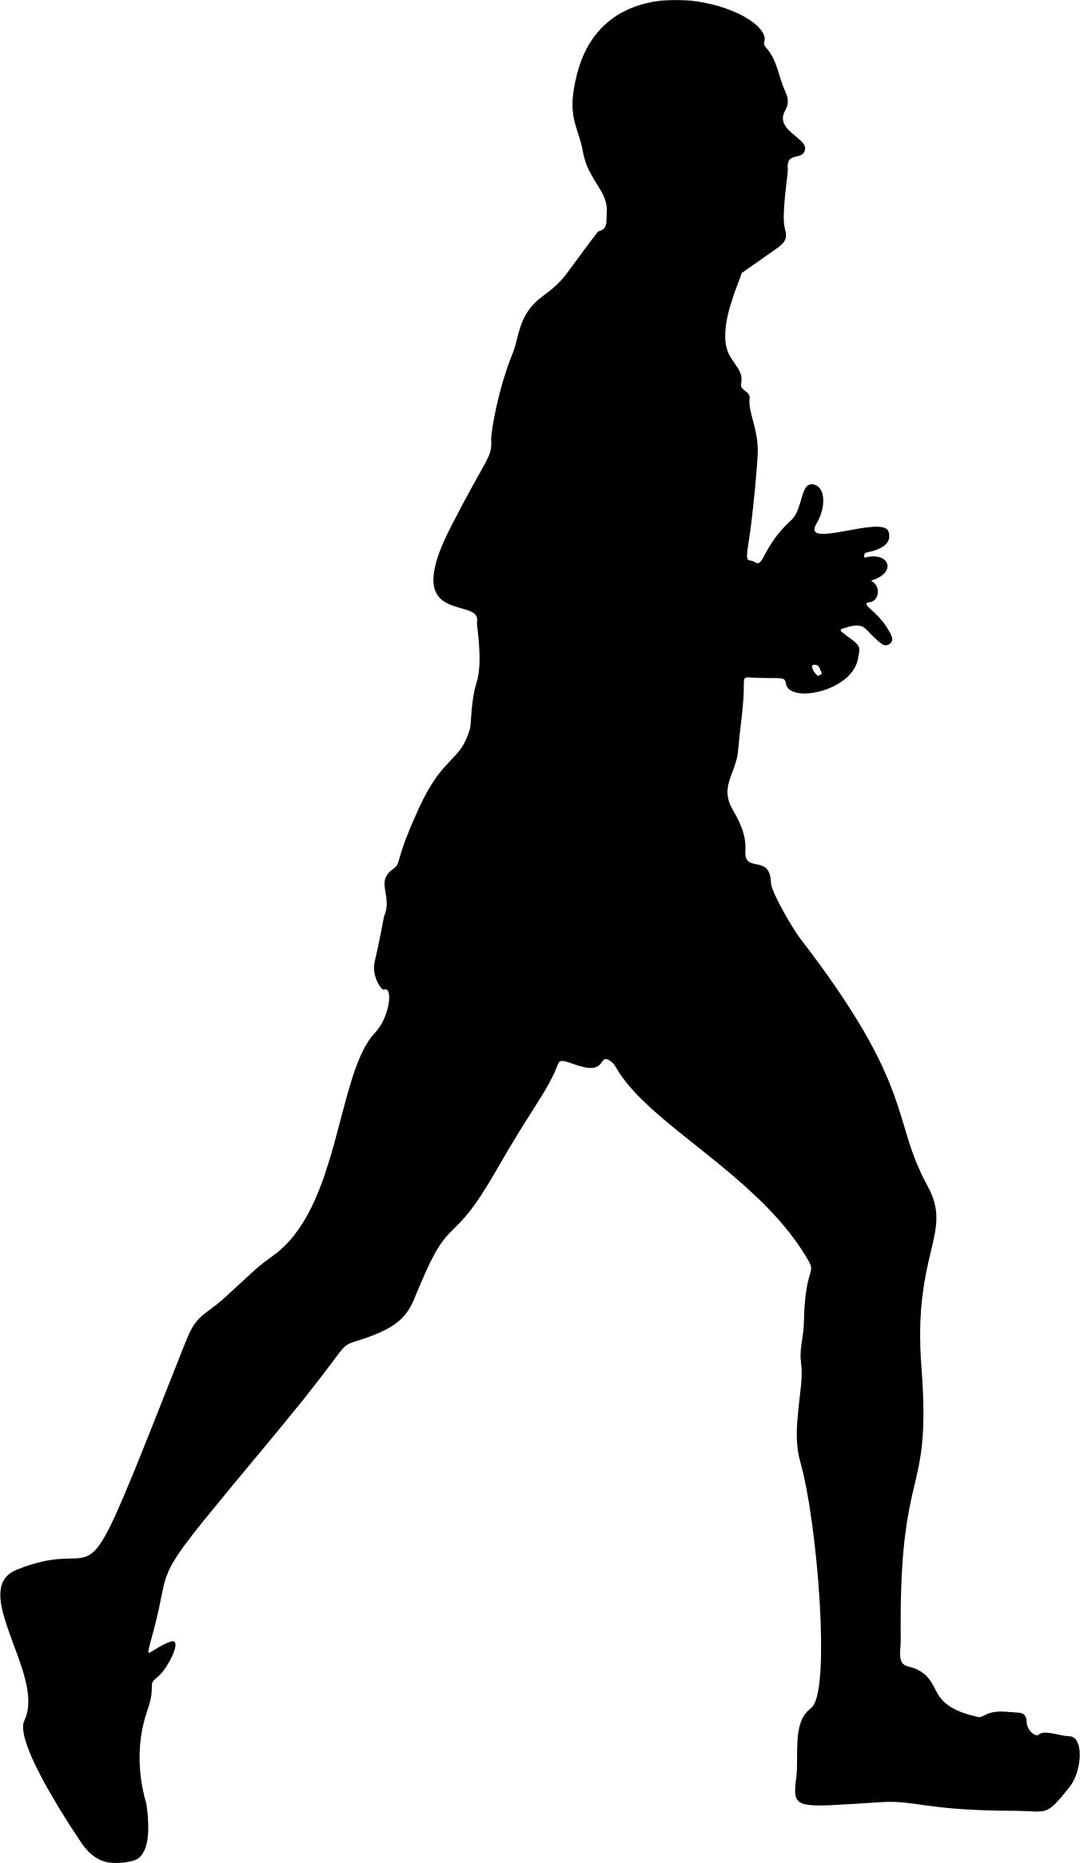 Male Runner Silhouette png transparent